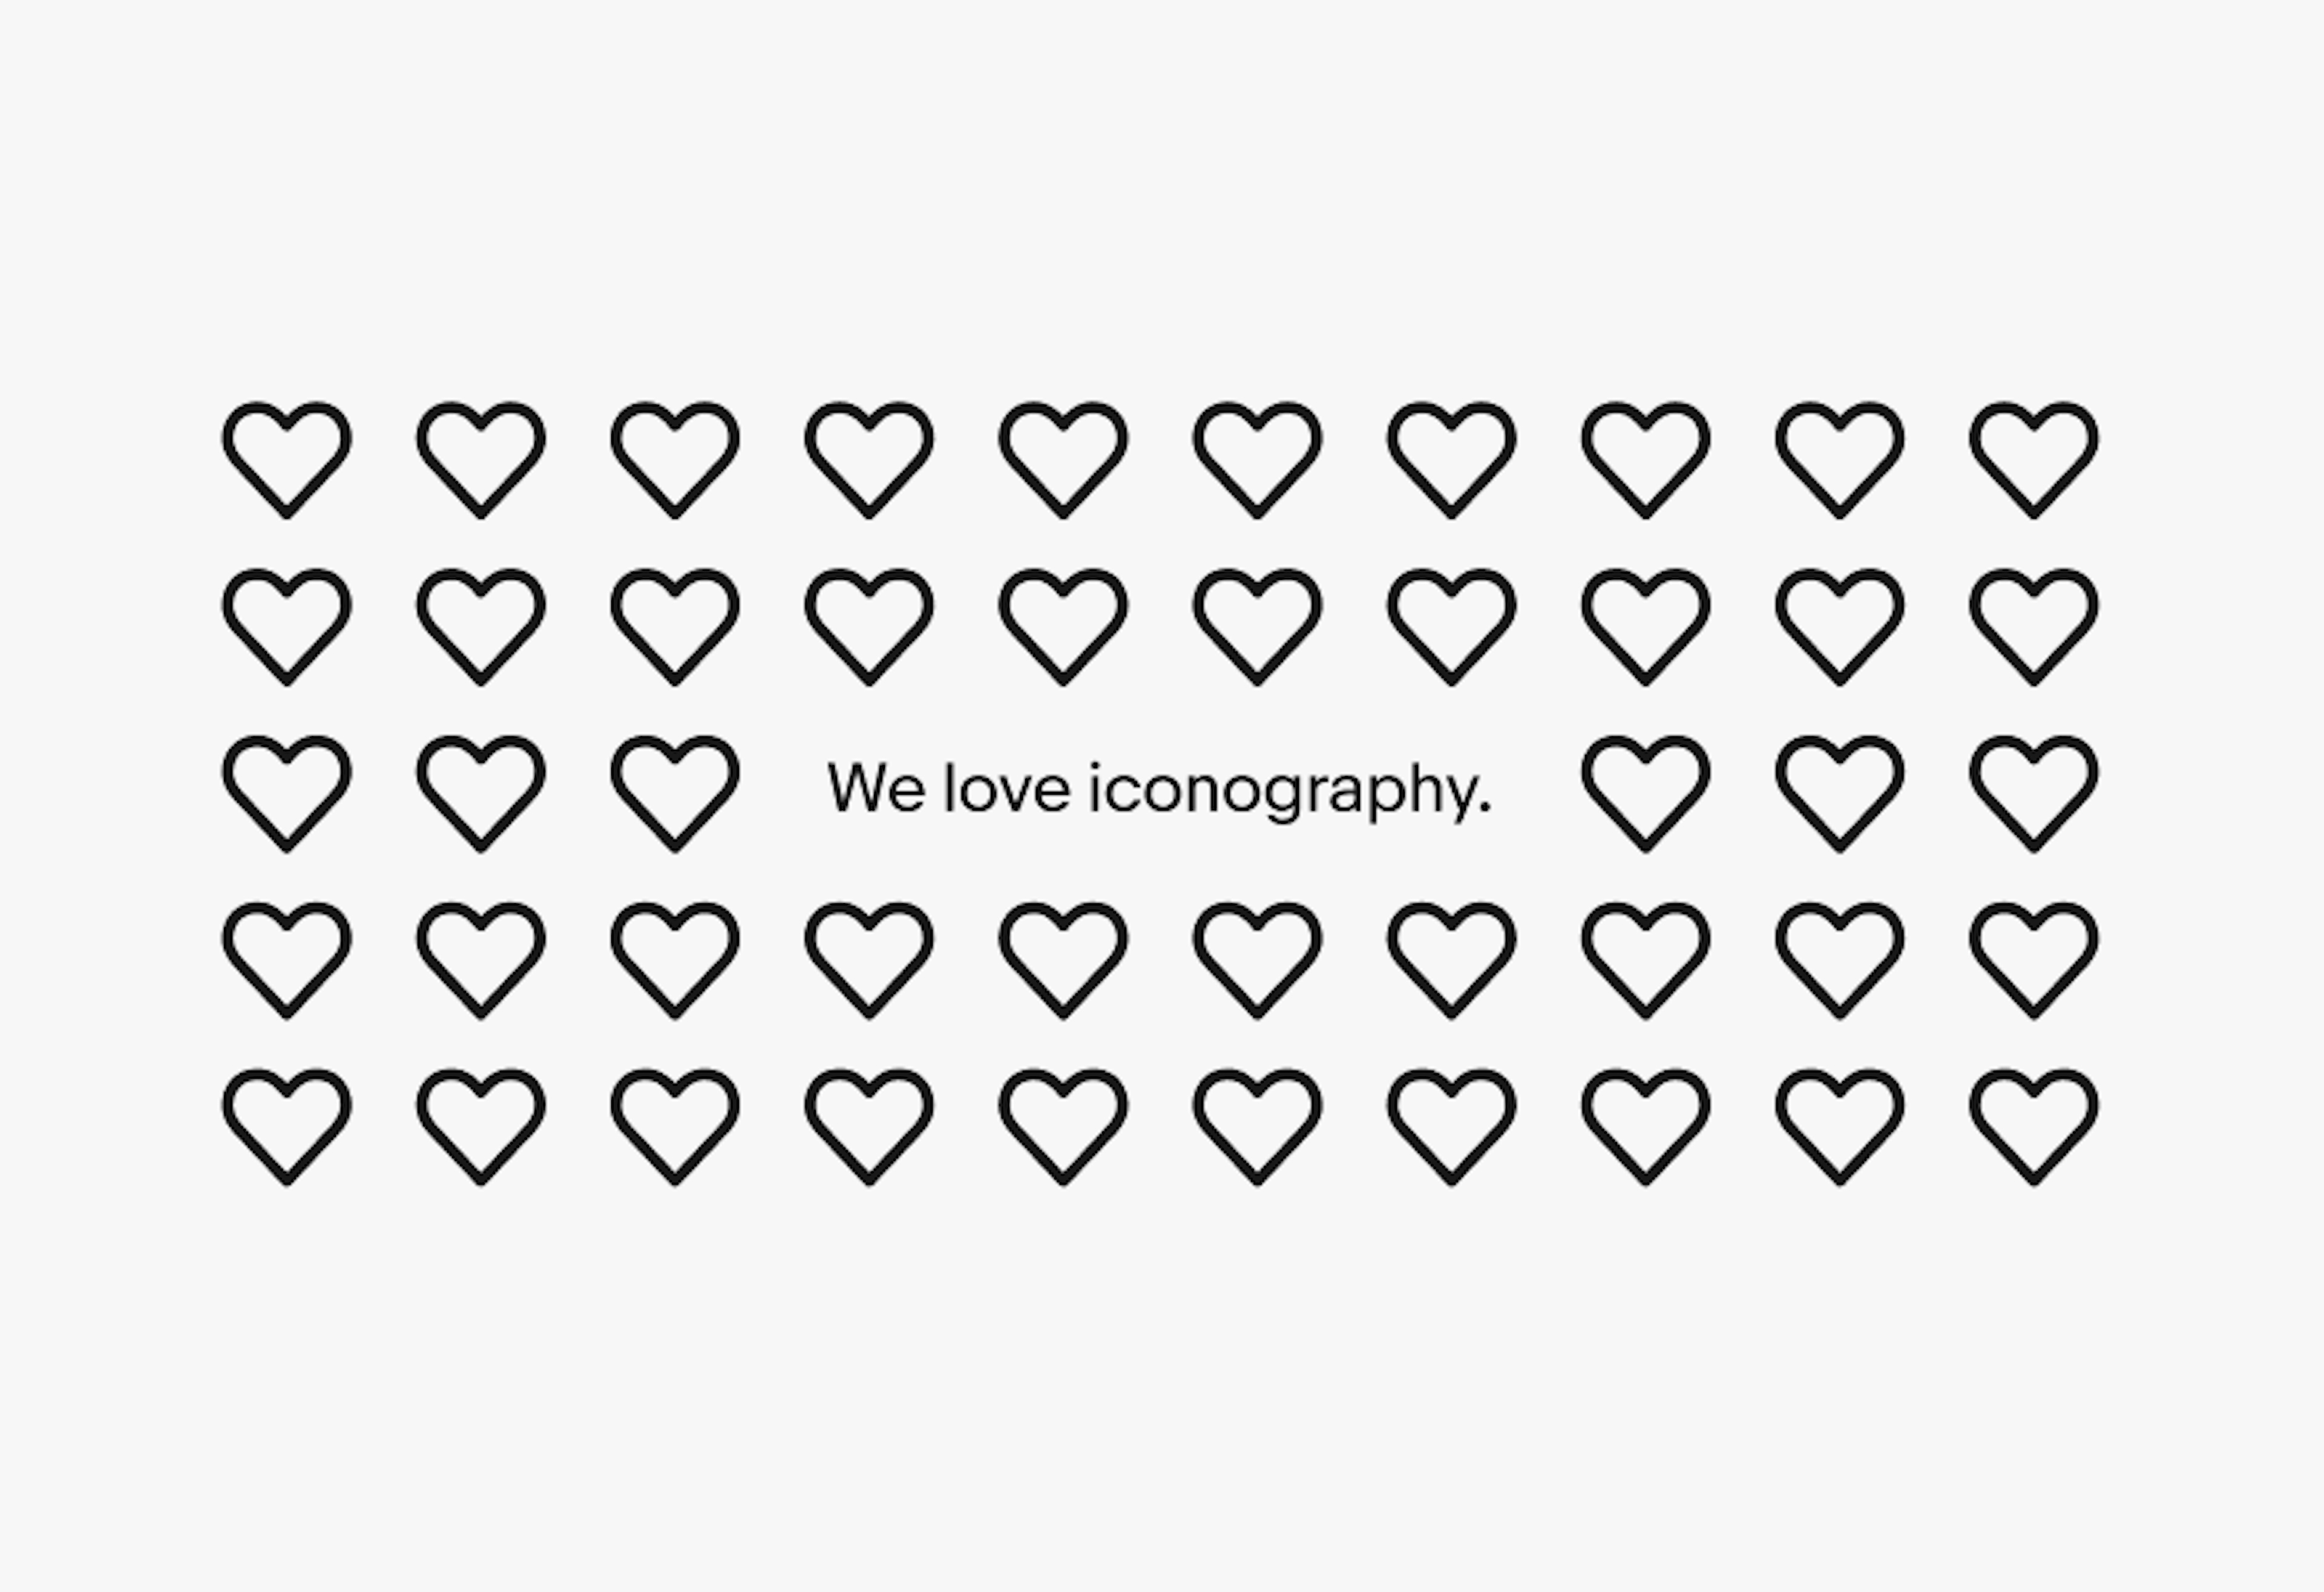 A grid of heart icons forming an image with the text “we love iconography” inside.